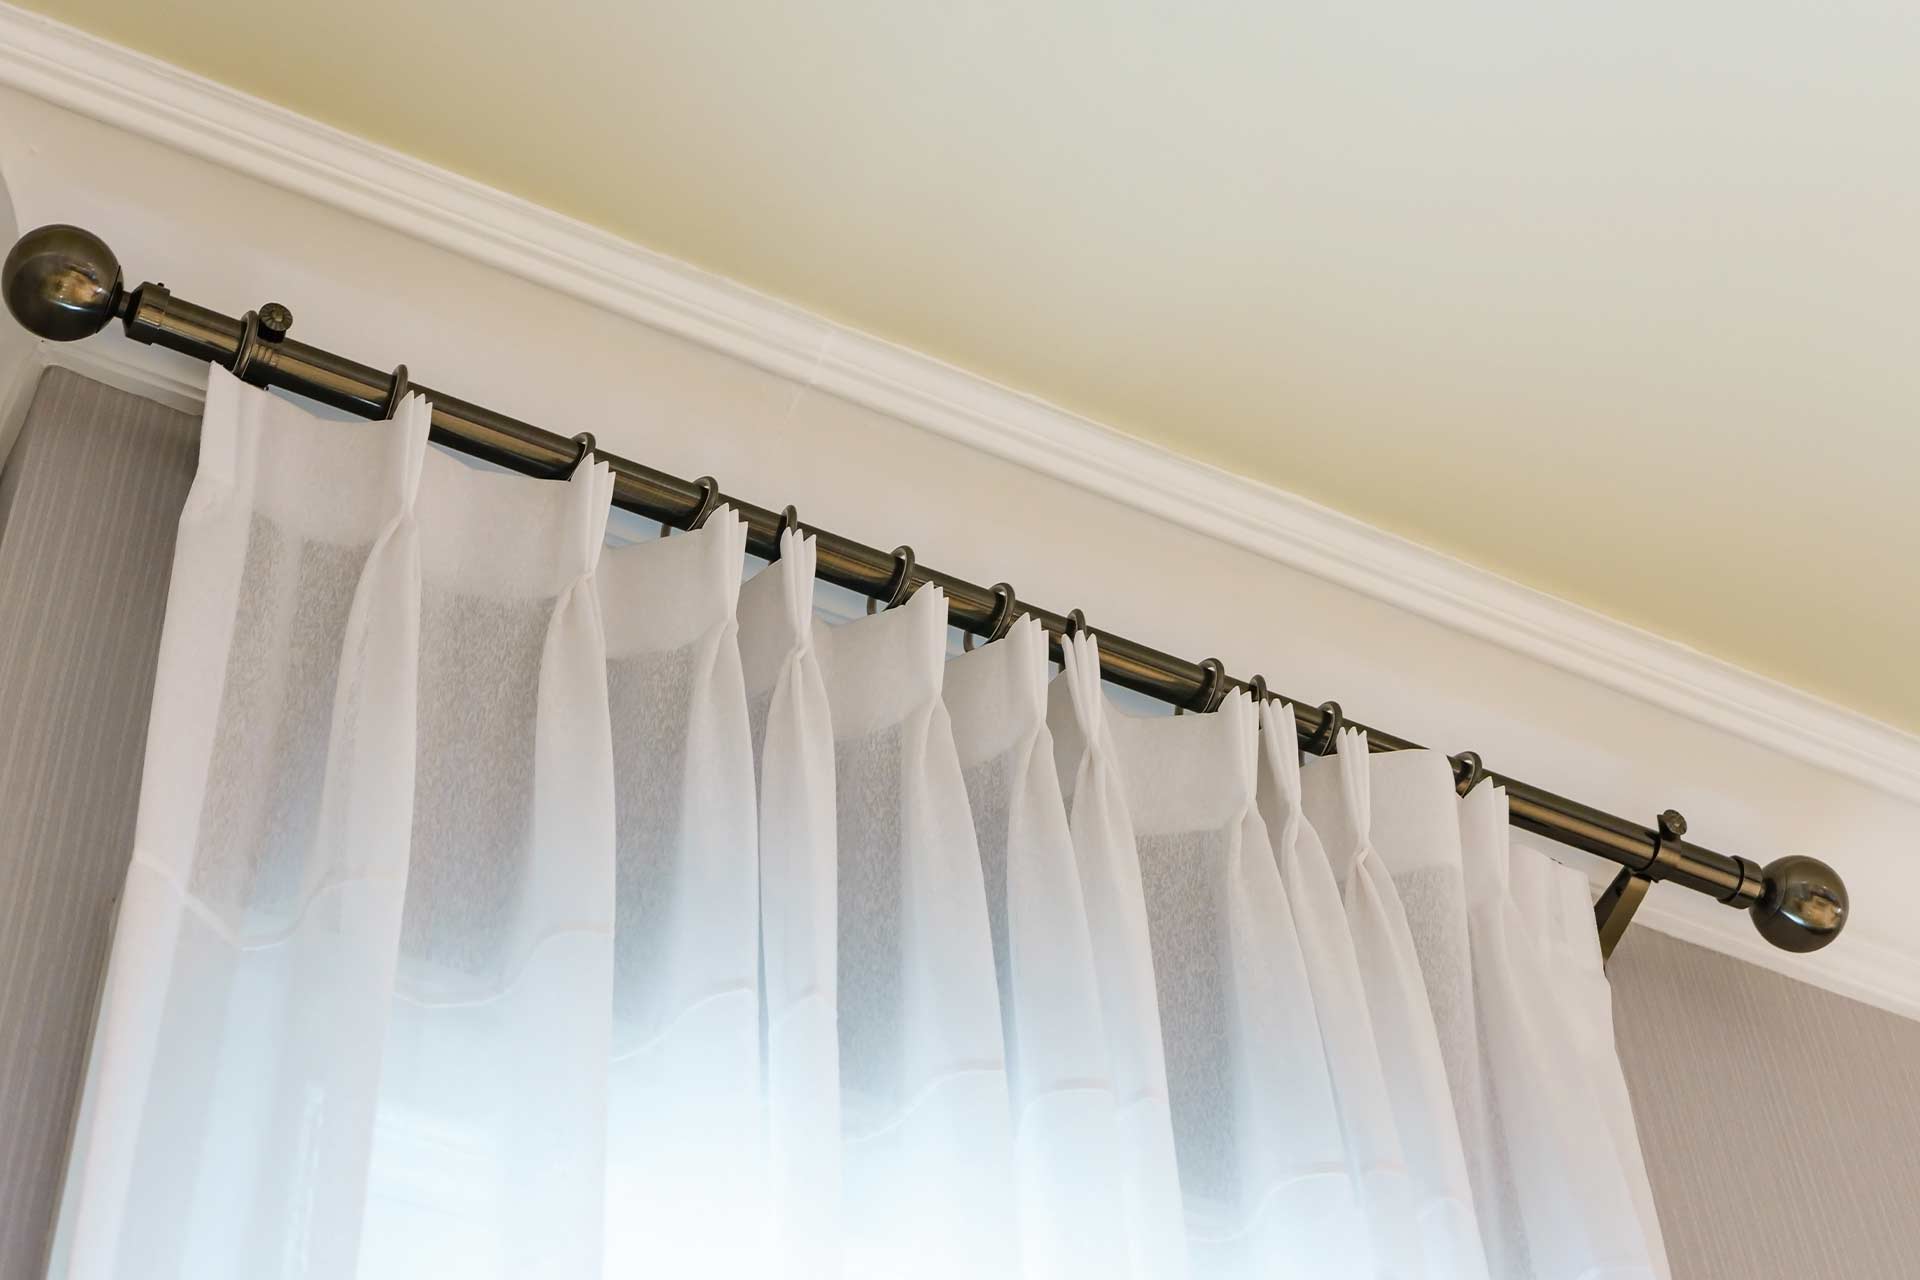 How Do You Hang Curtains With Rings